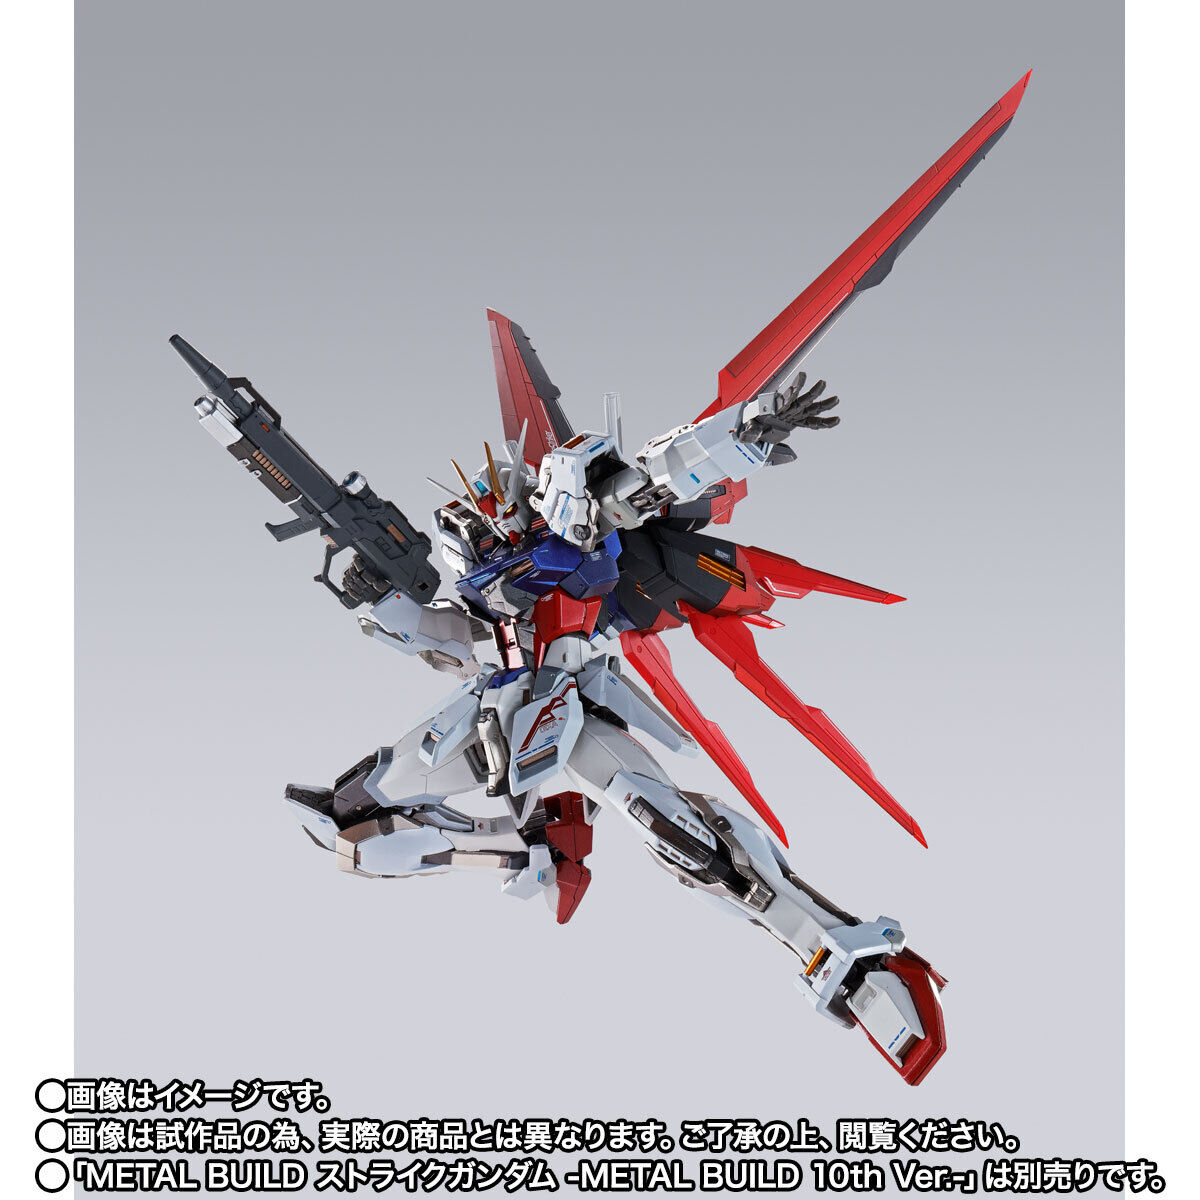 Metal Build AQM/E-X01 Aile Striker for Gundam Seed Series(Metal Build 10th Anniversary Limited Package)